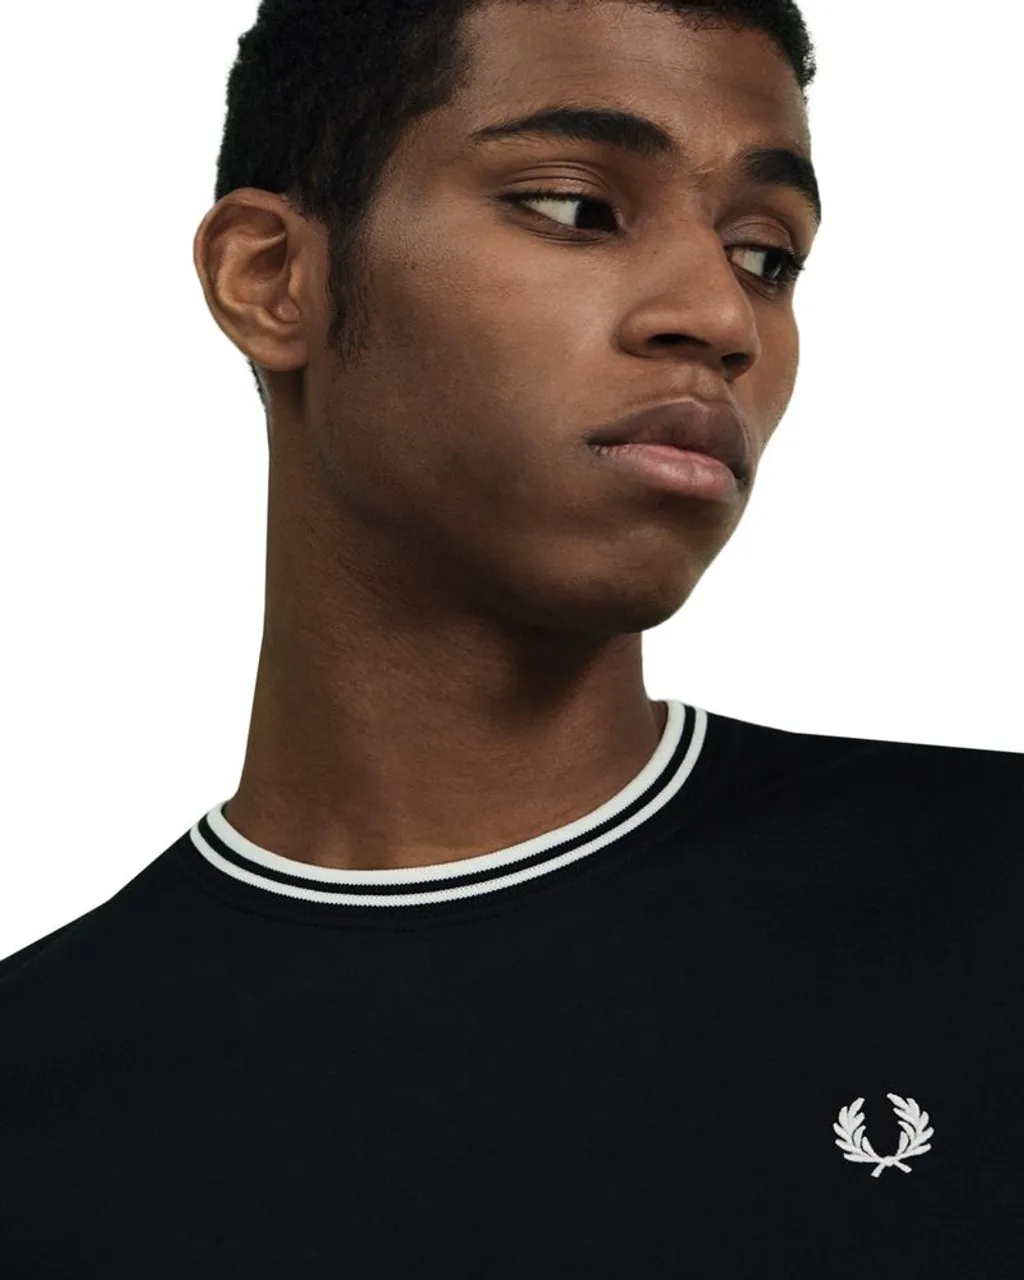 Fred Perry Twin Tipped T-shirt Zwart